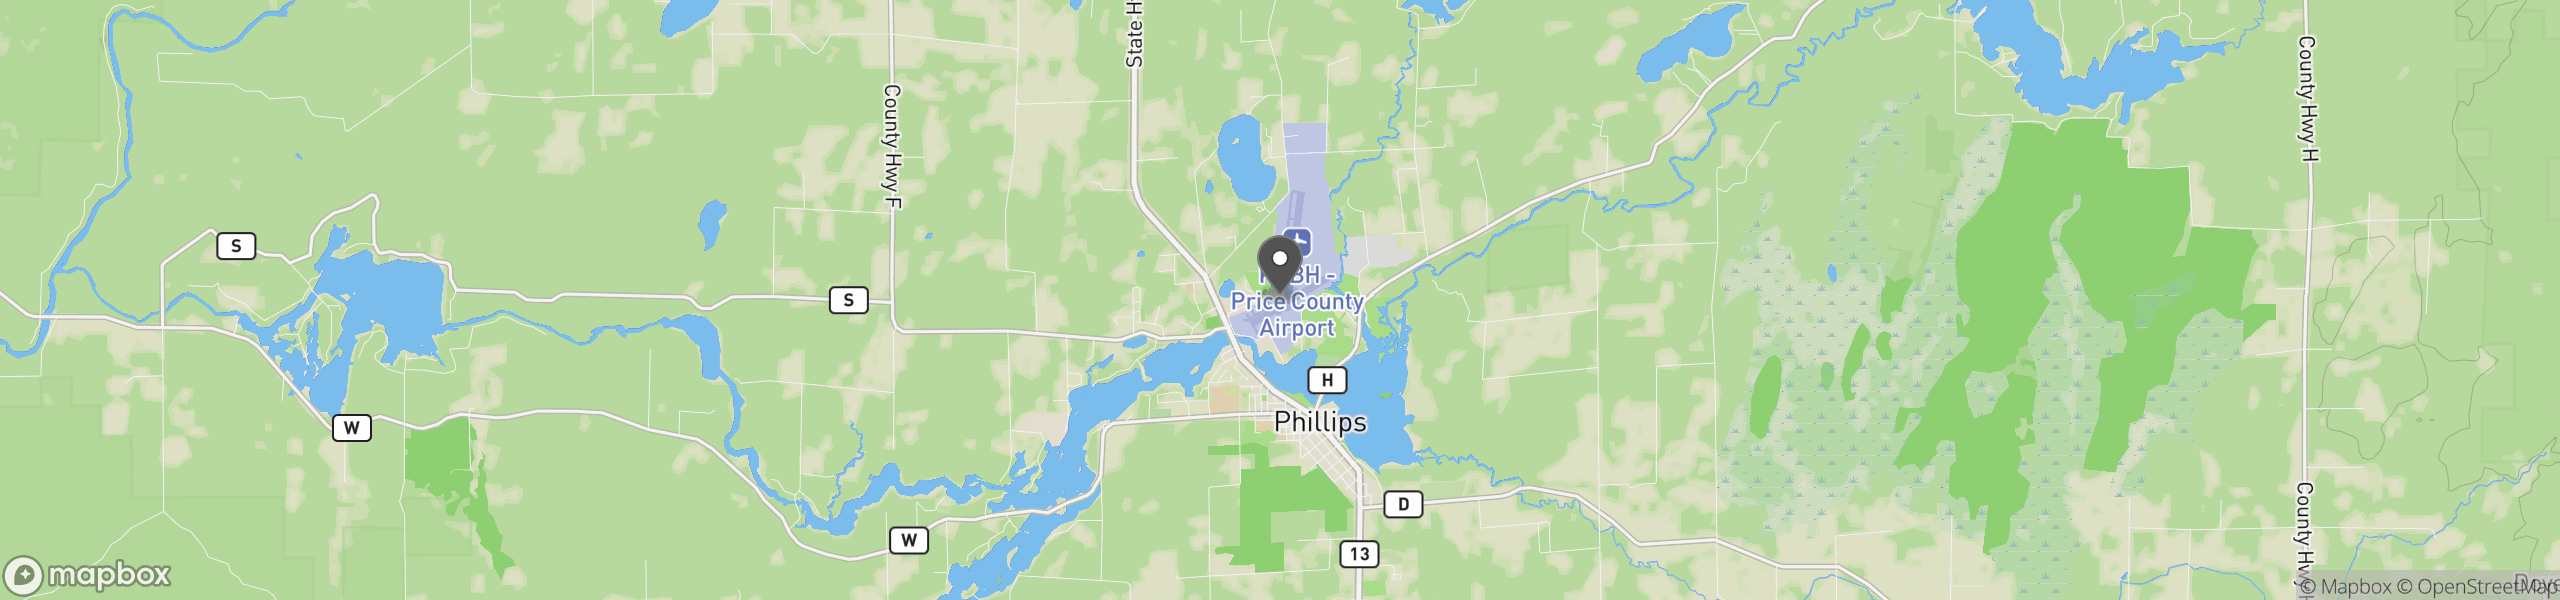 Phillips, WI 54555